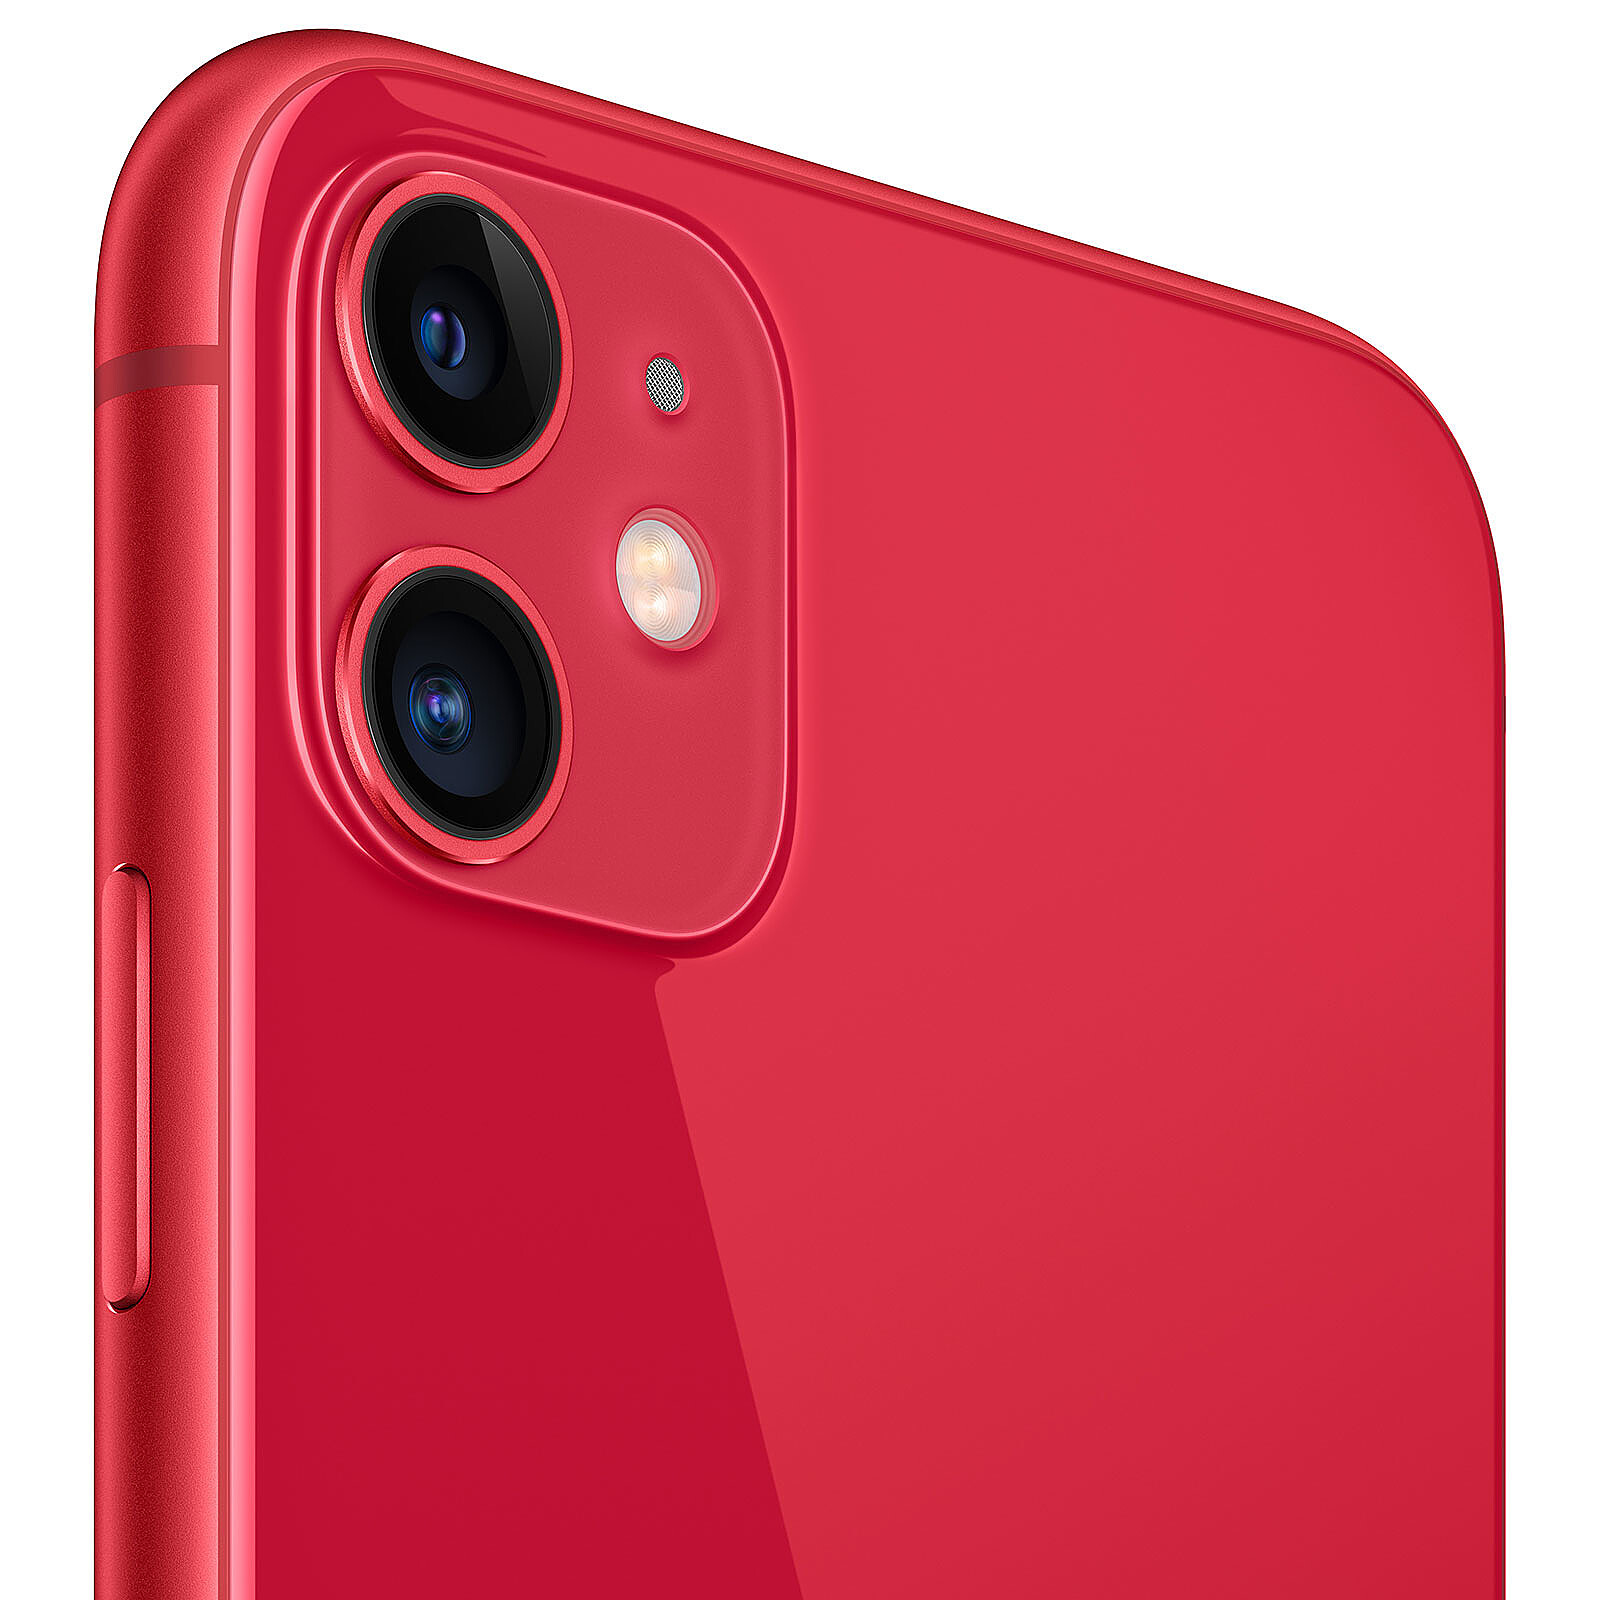 Apple iPhone 11 128GB (PRODUCT)RED - Mobile phone & smartphone